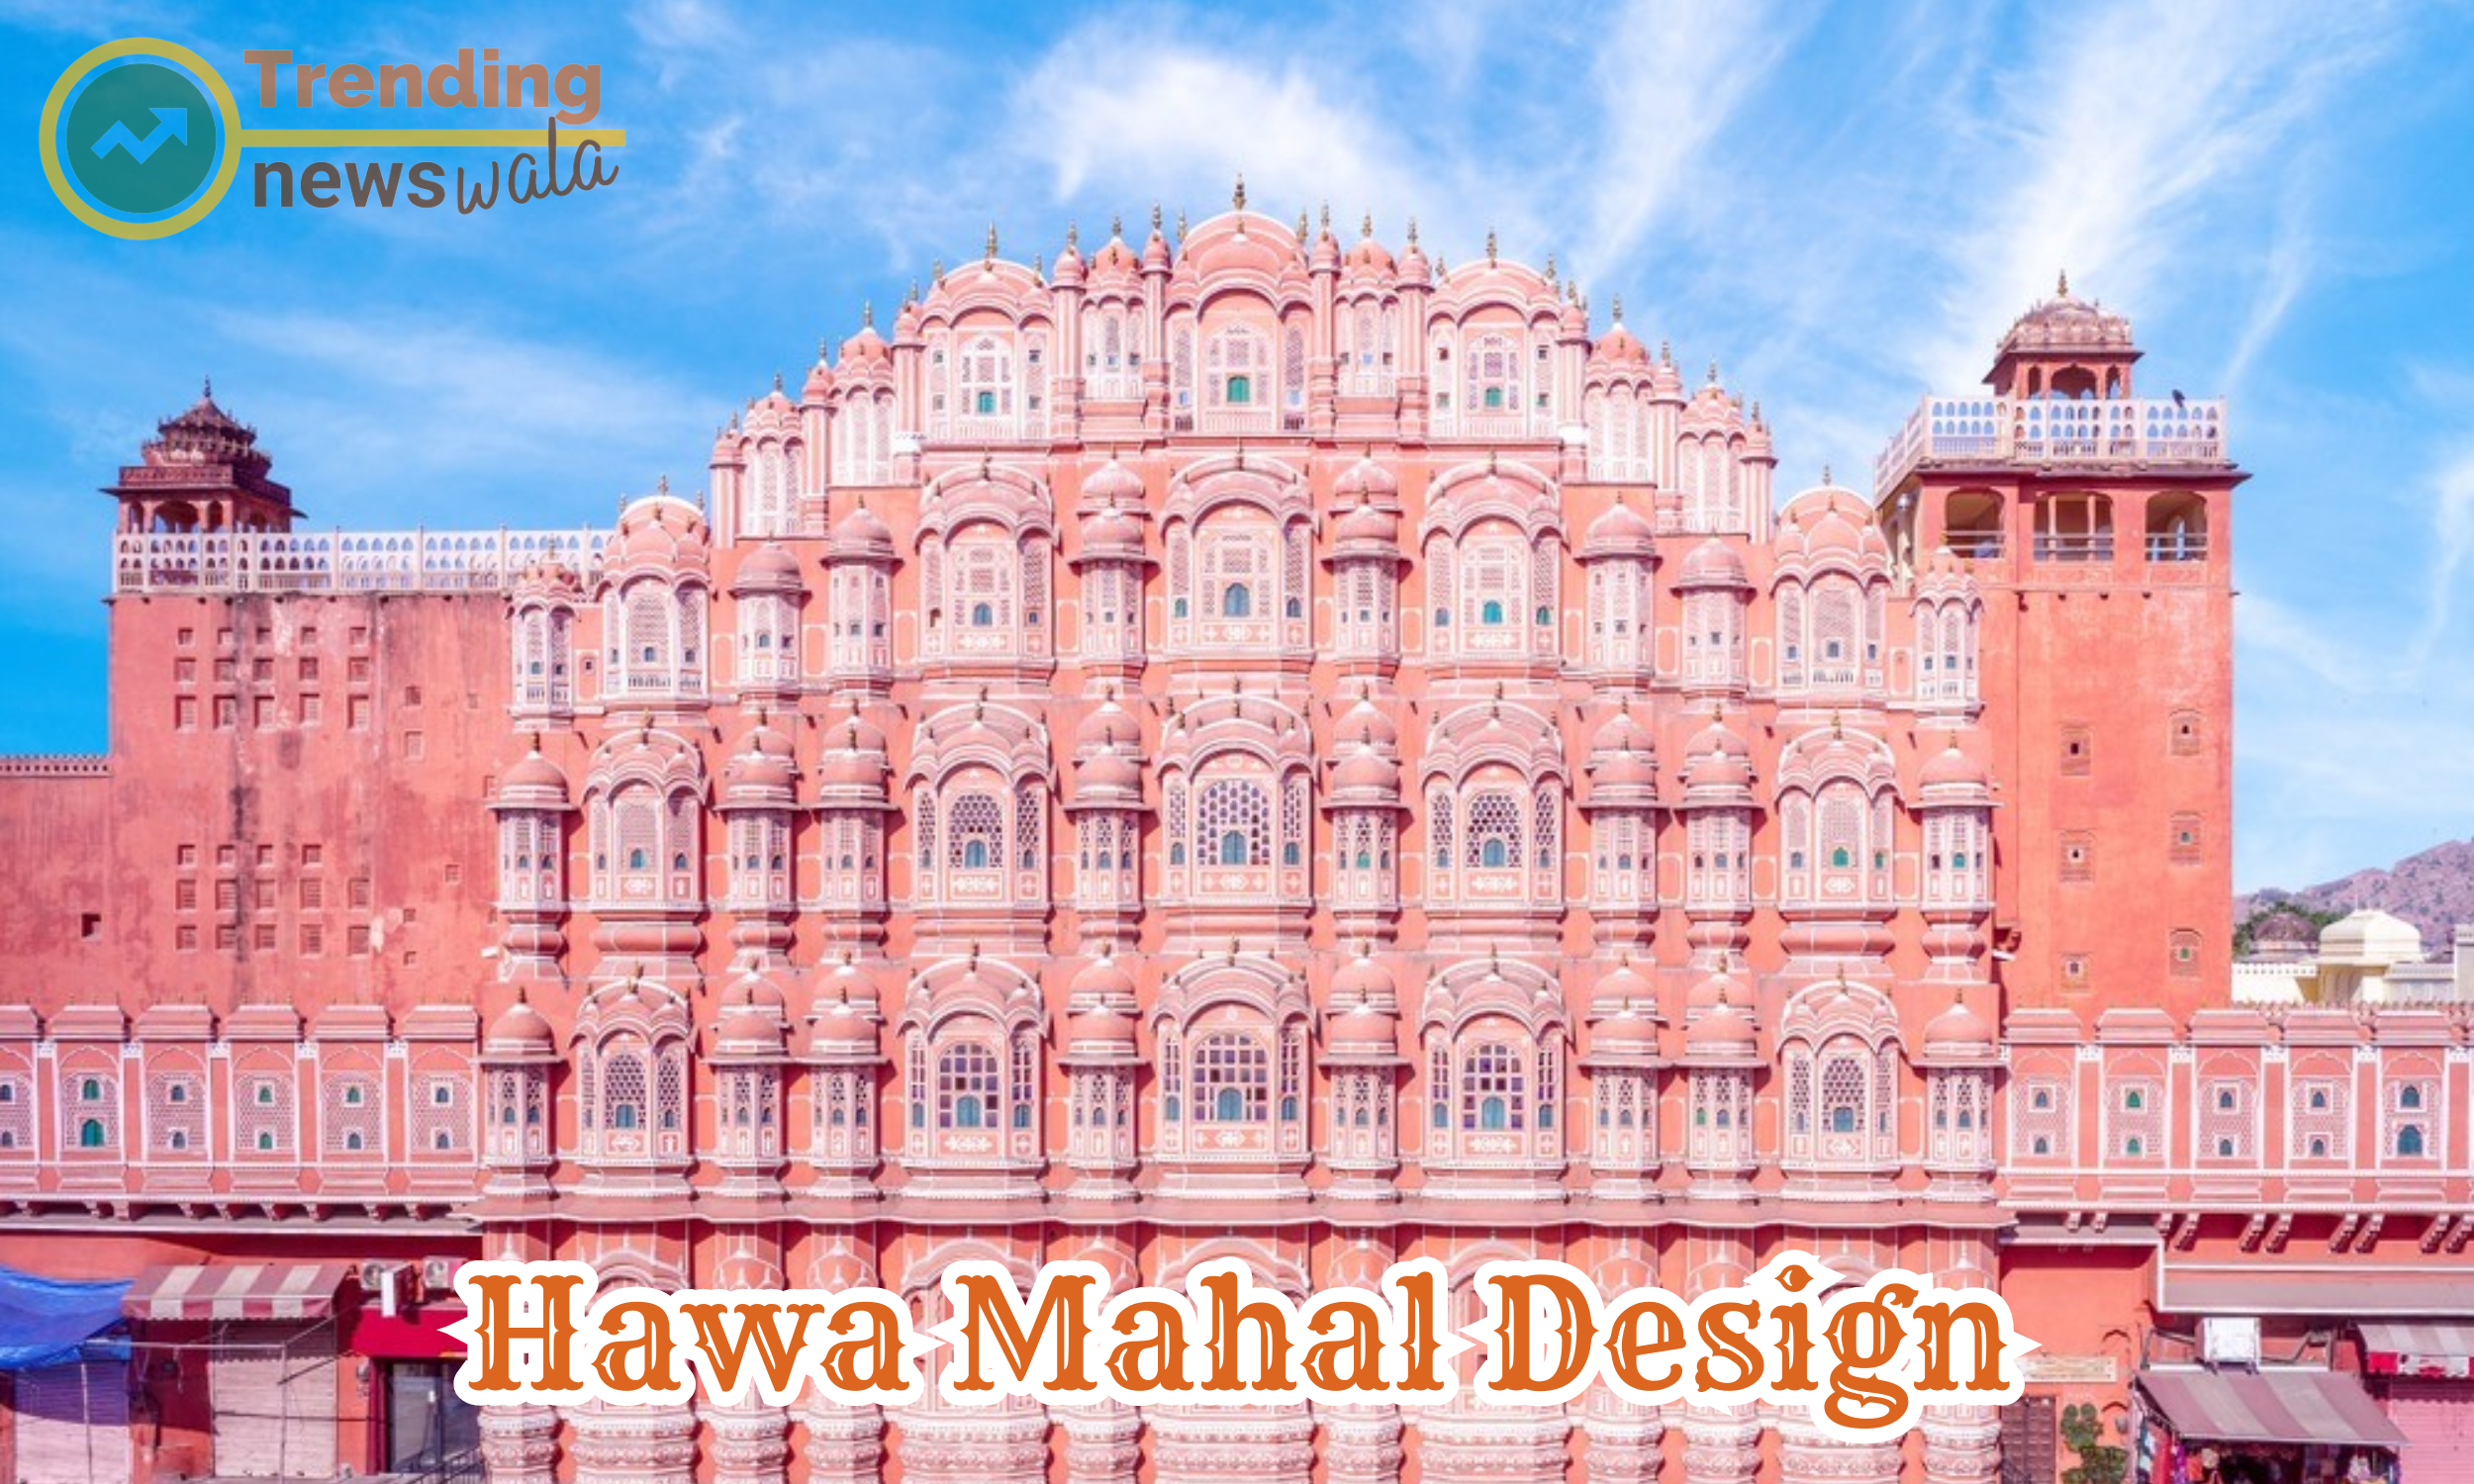 Hawa Mahal, also known as the Palace of Winds, is an iconic structure in Jaipur